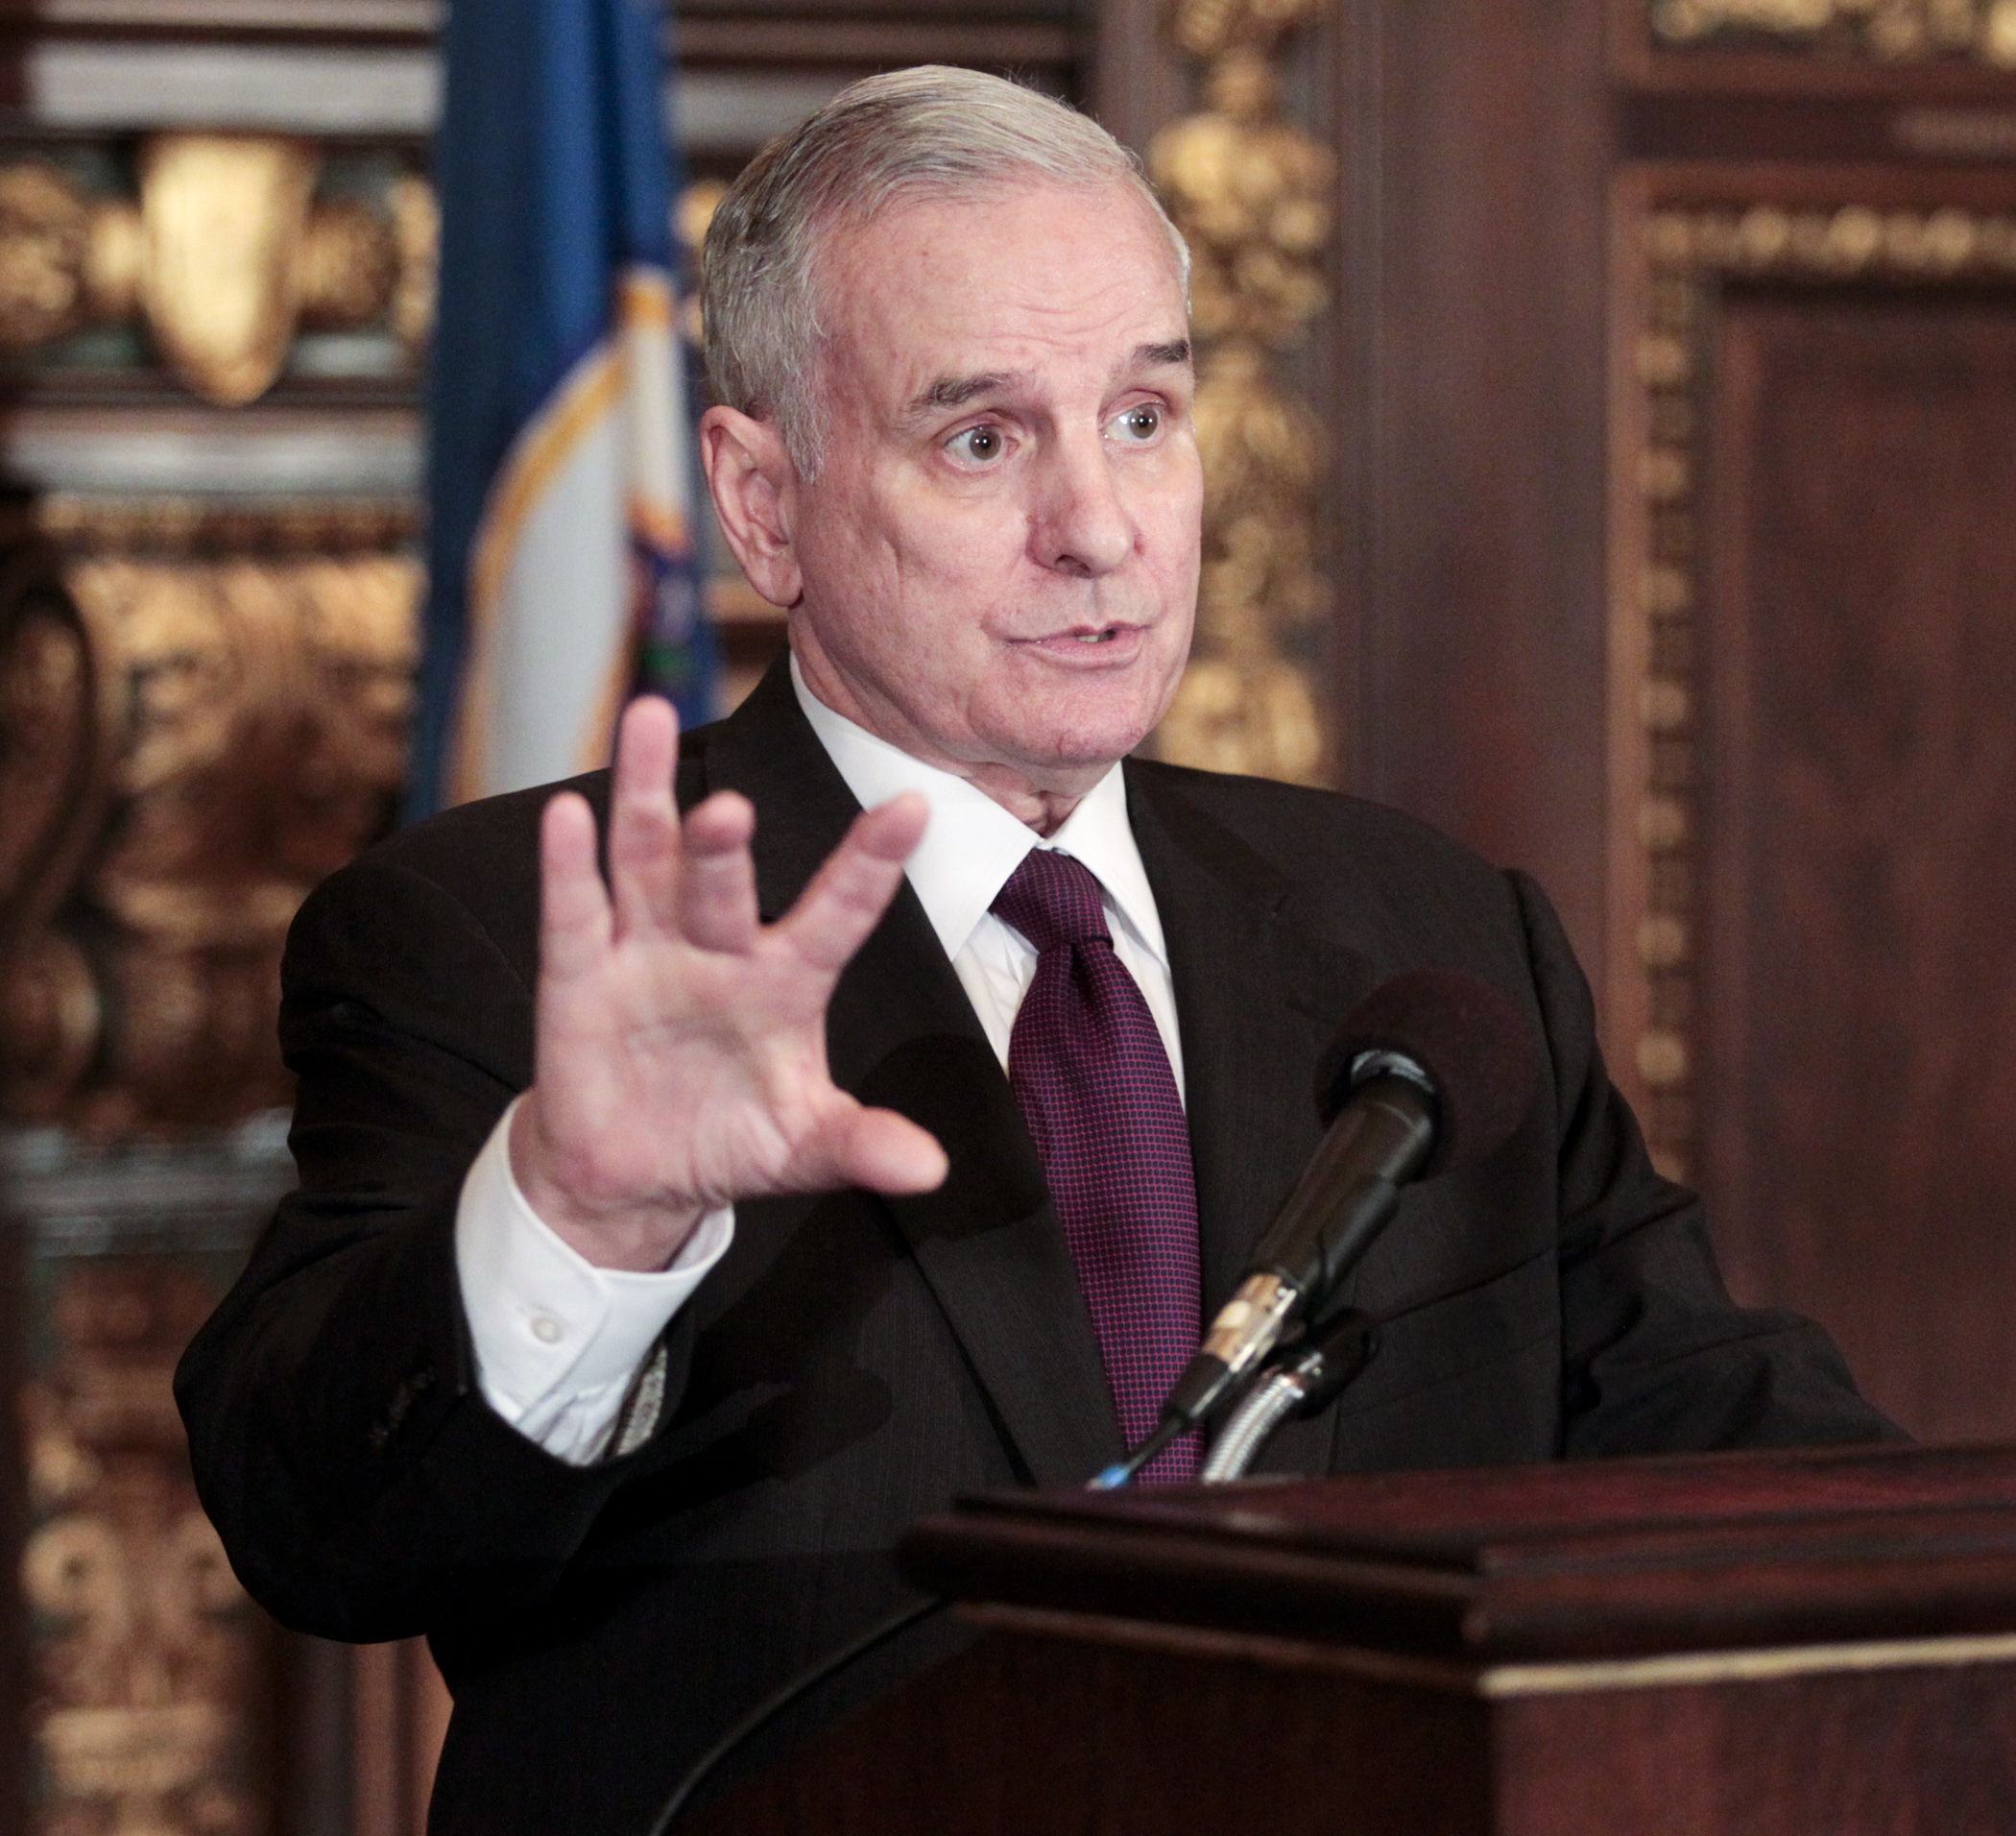 Gov. Mark Dayton said at a May 12 press conference that his end-of-session priorities are the bonding and budget bills, and he would like the Senate to vote on the payday lending bill. Photo by Paul Battaglia